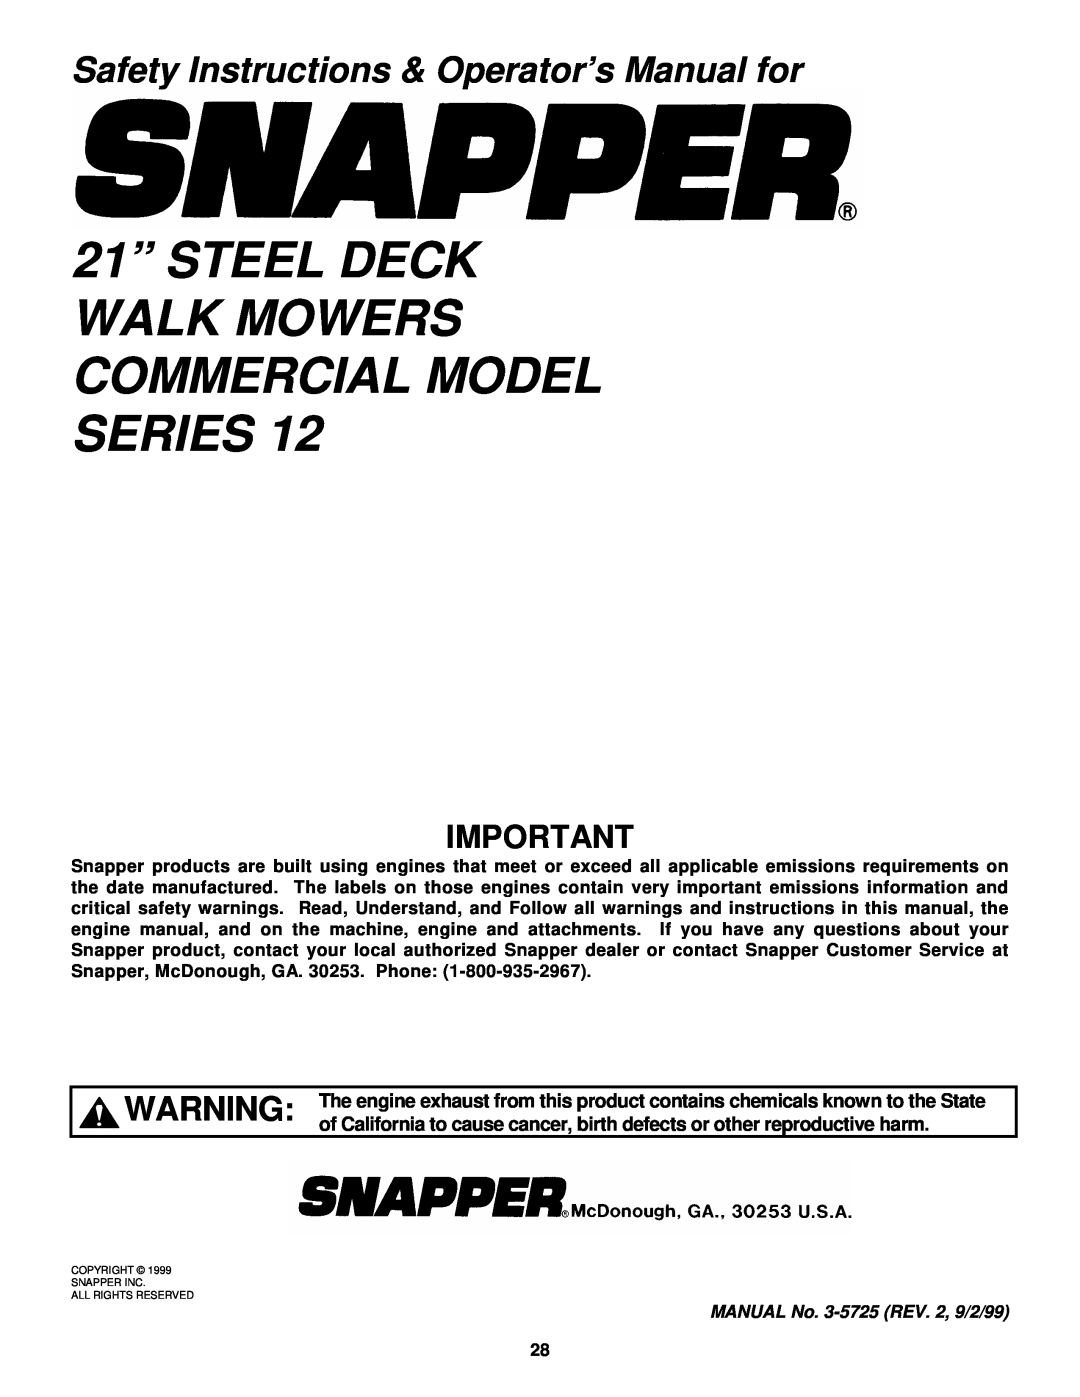 Snapper GP215512KWV 21” STEEL DECK, Walk Mowers Commercial Model Series, Safety Instructions & Operator’s Manual for 